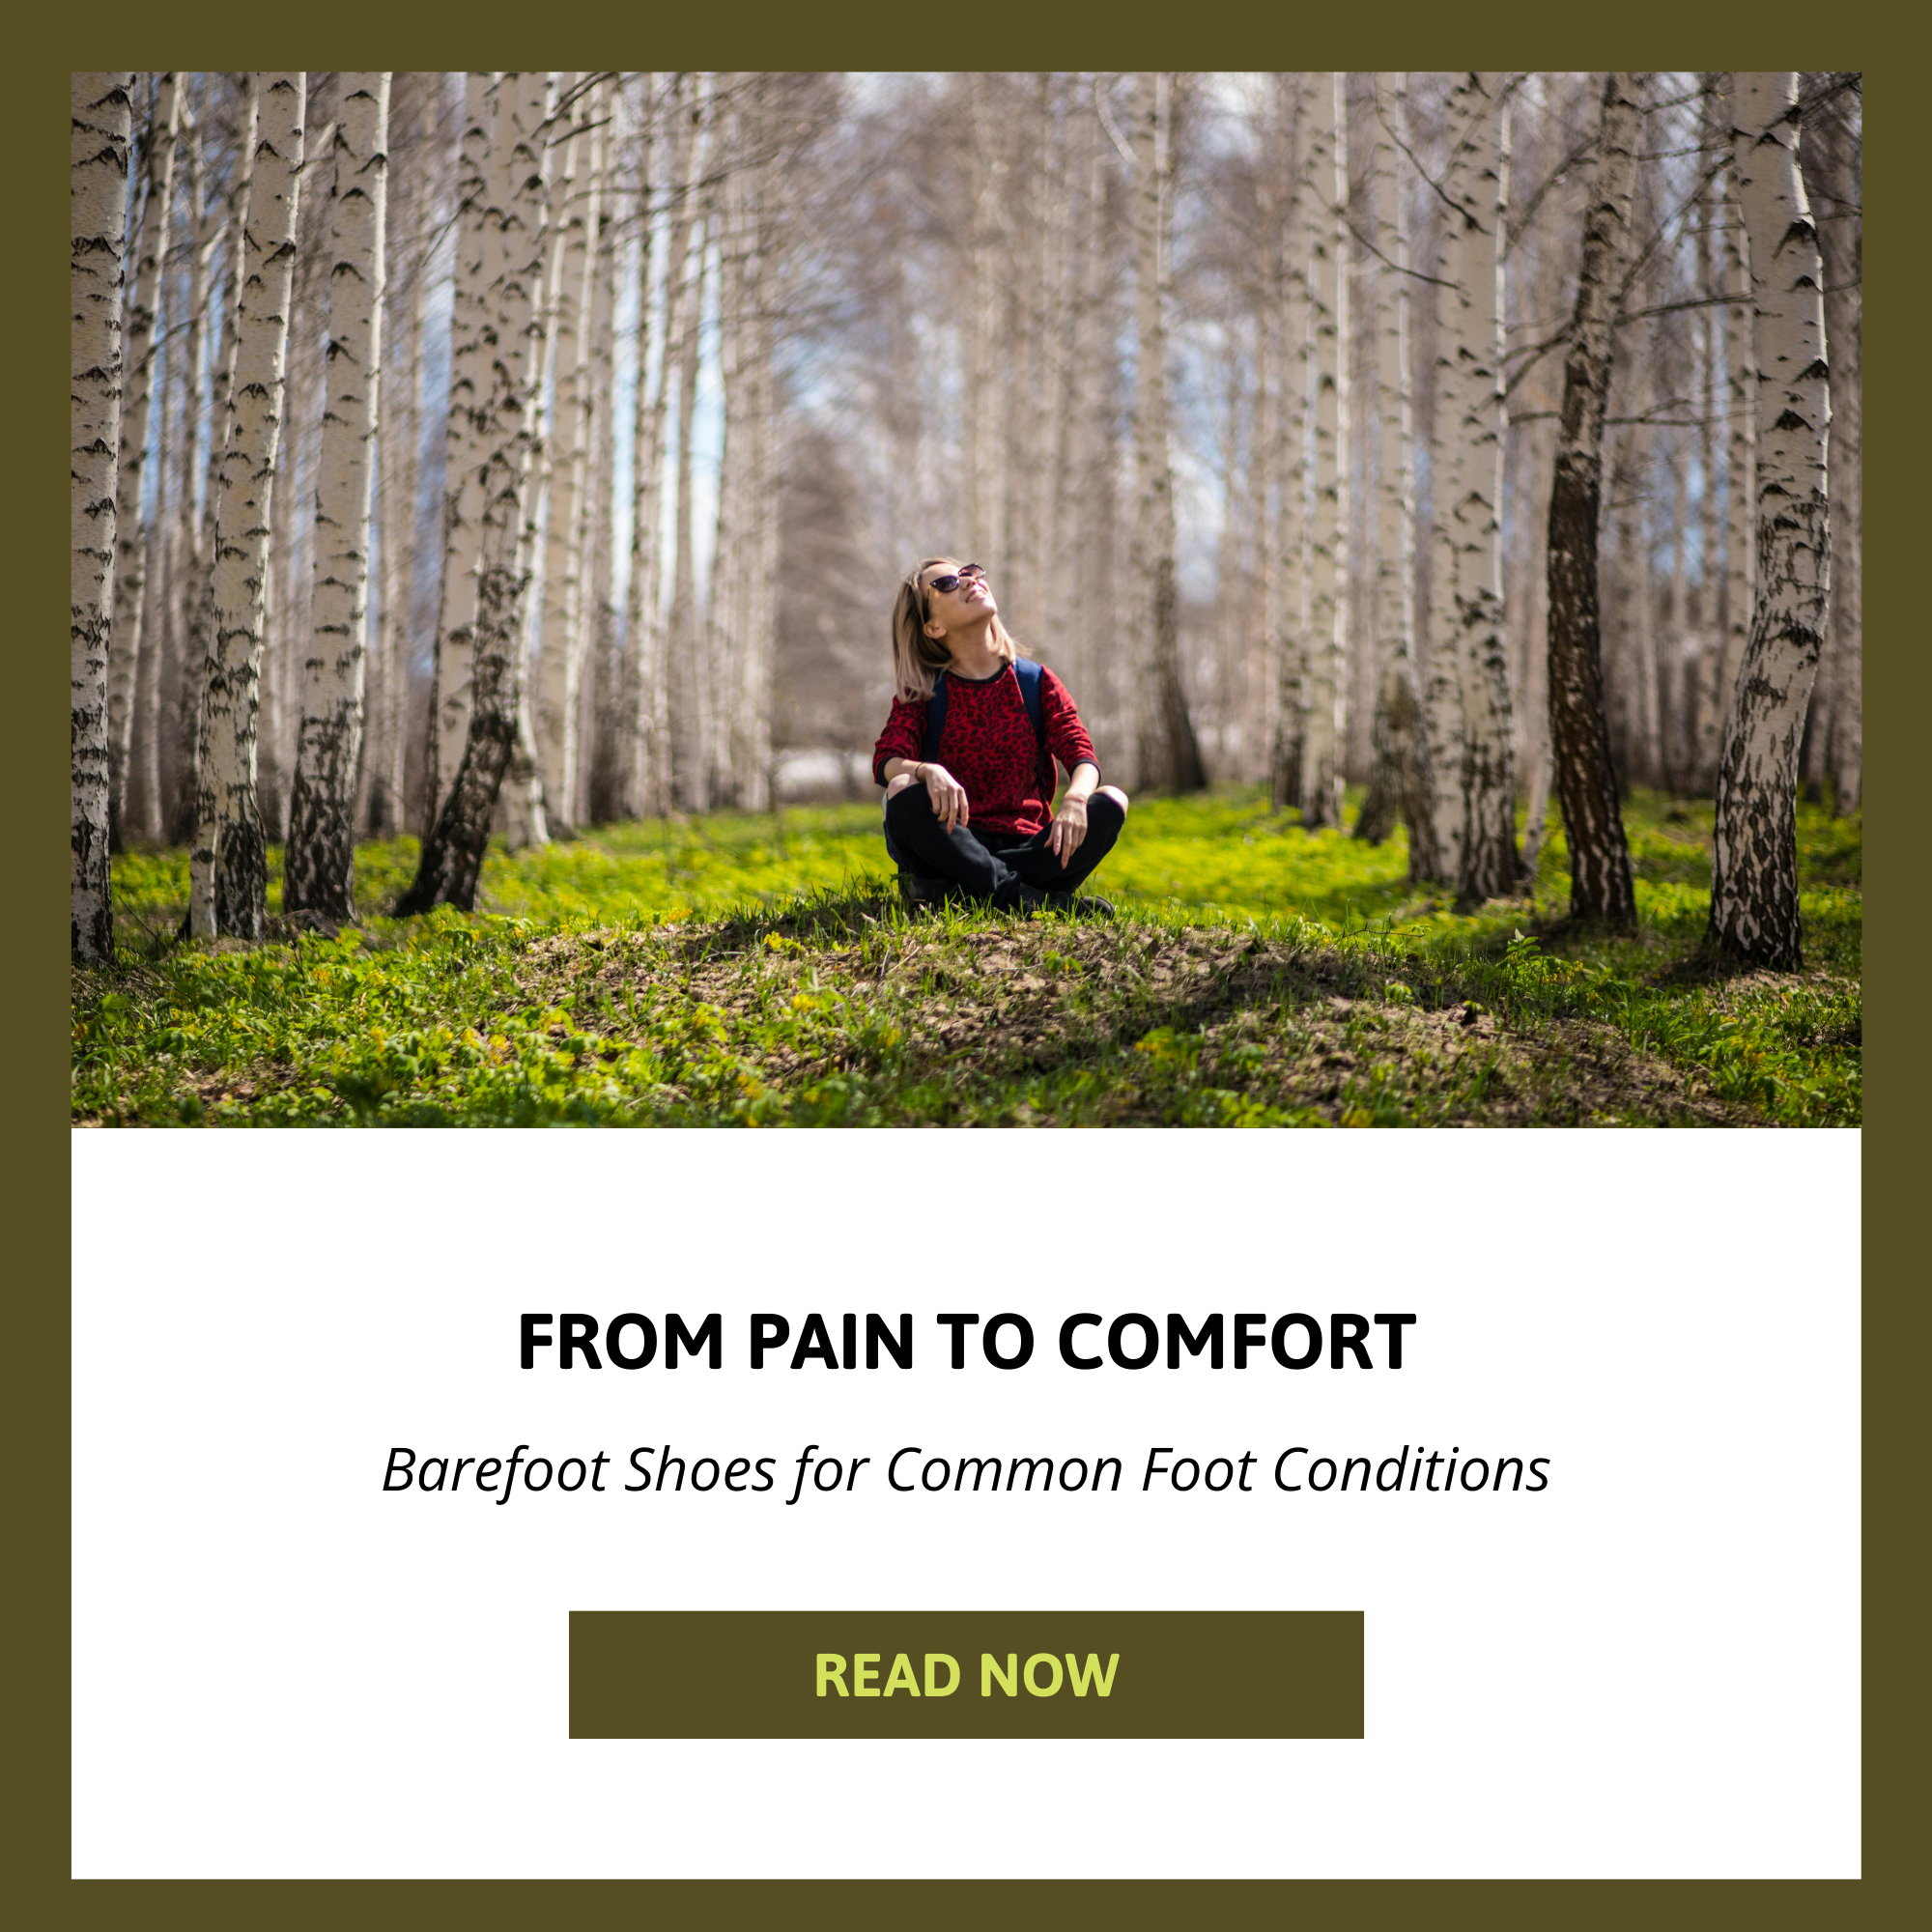 From Pain to Comfort: Barefoot Shoes for Common Foot Conditions